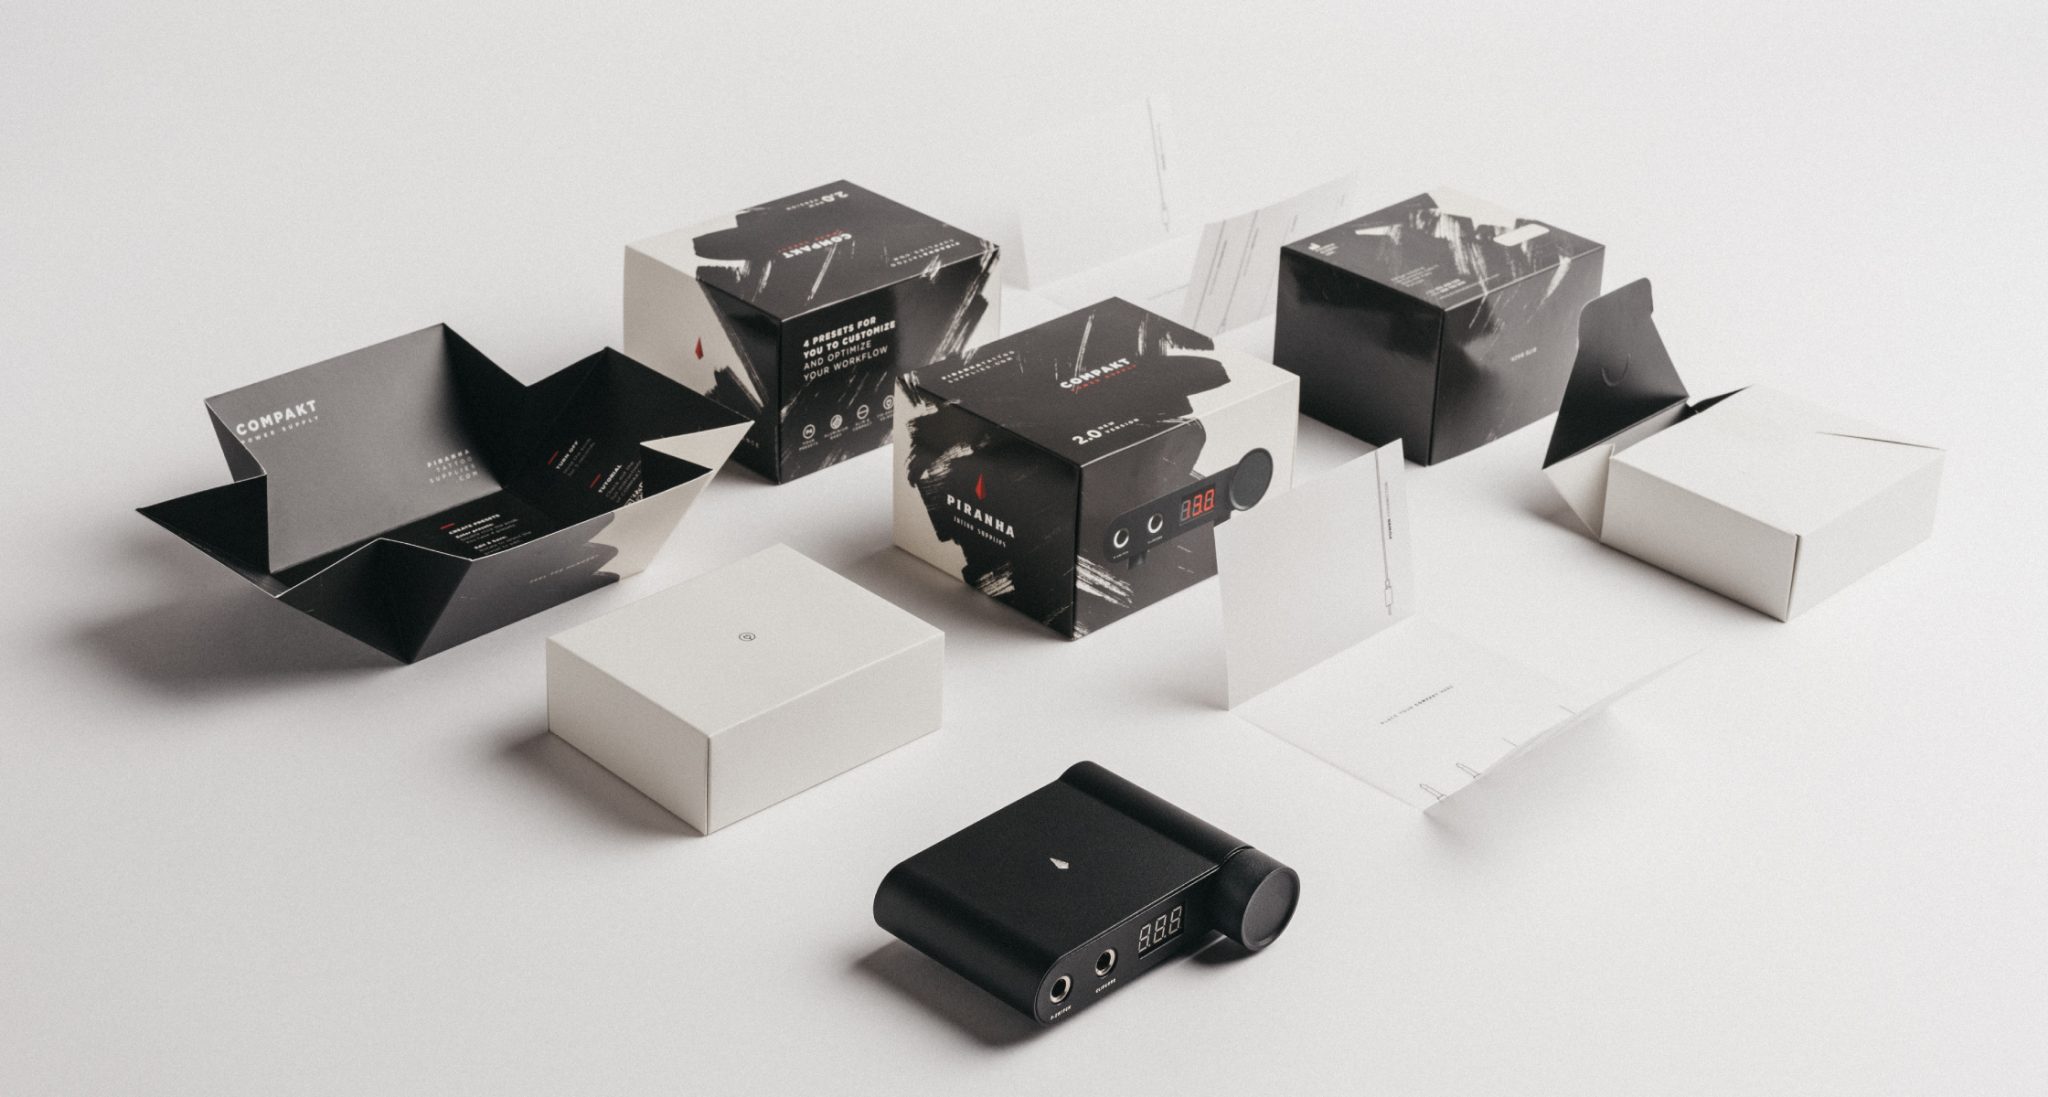 Packaging as a Straightforward Manual for an Electronic Product Created by Possibility